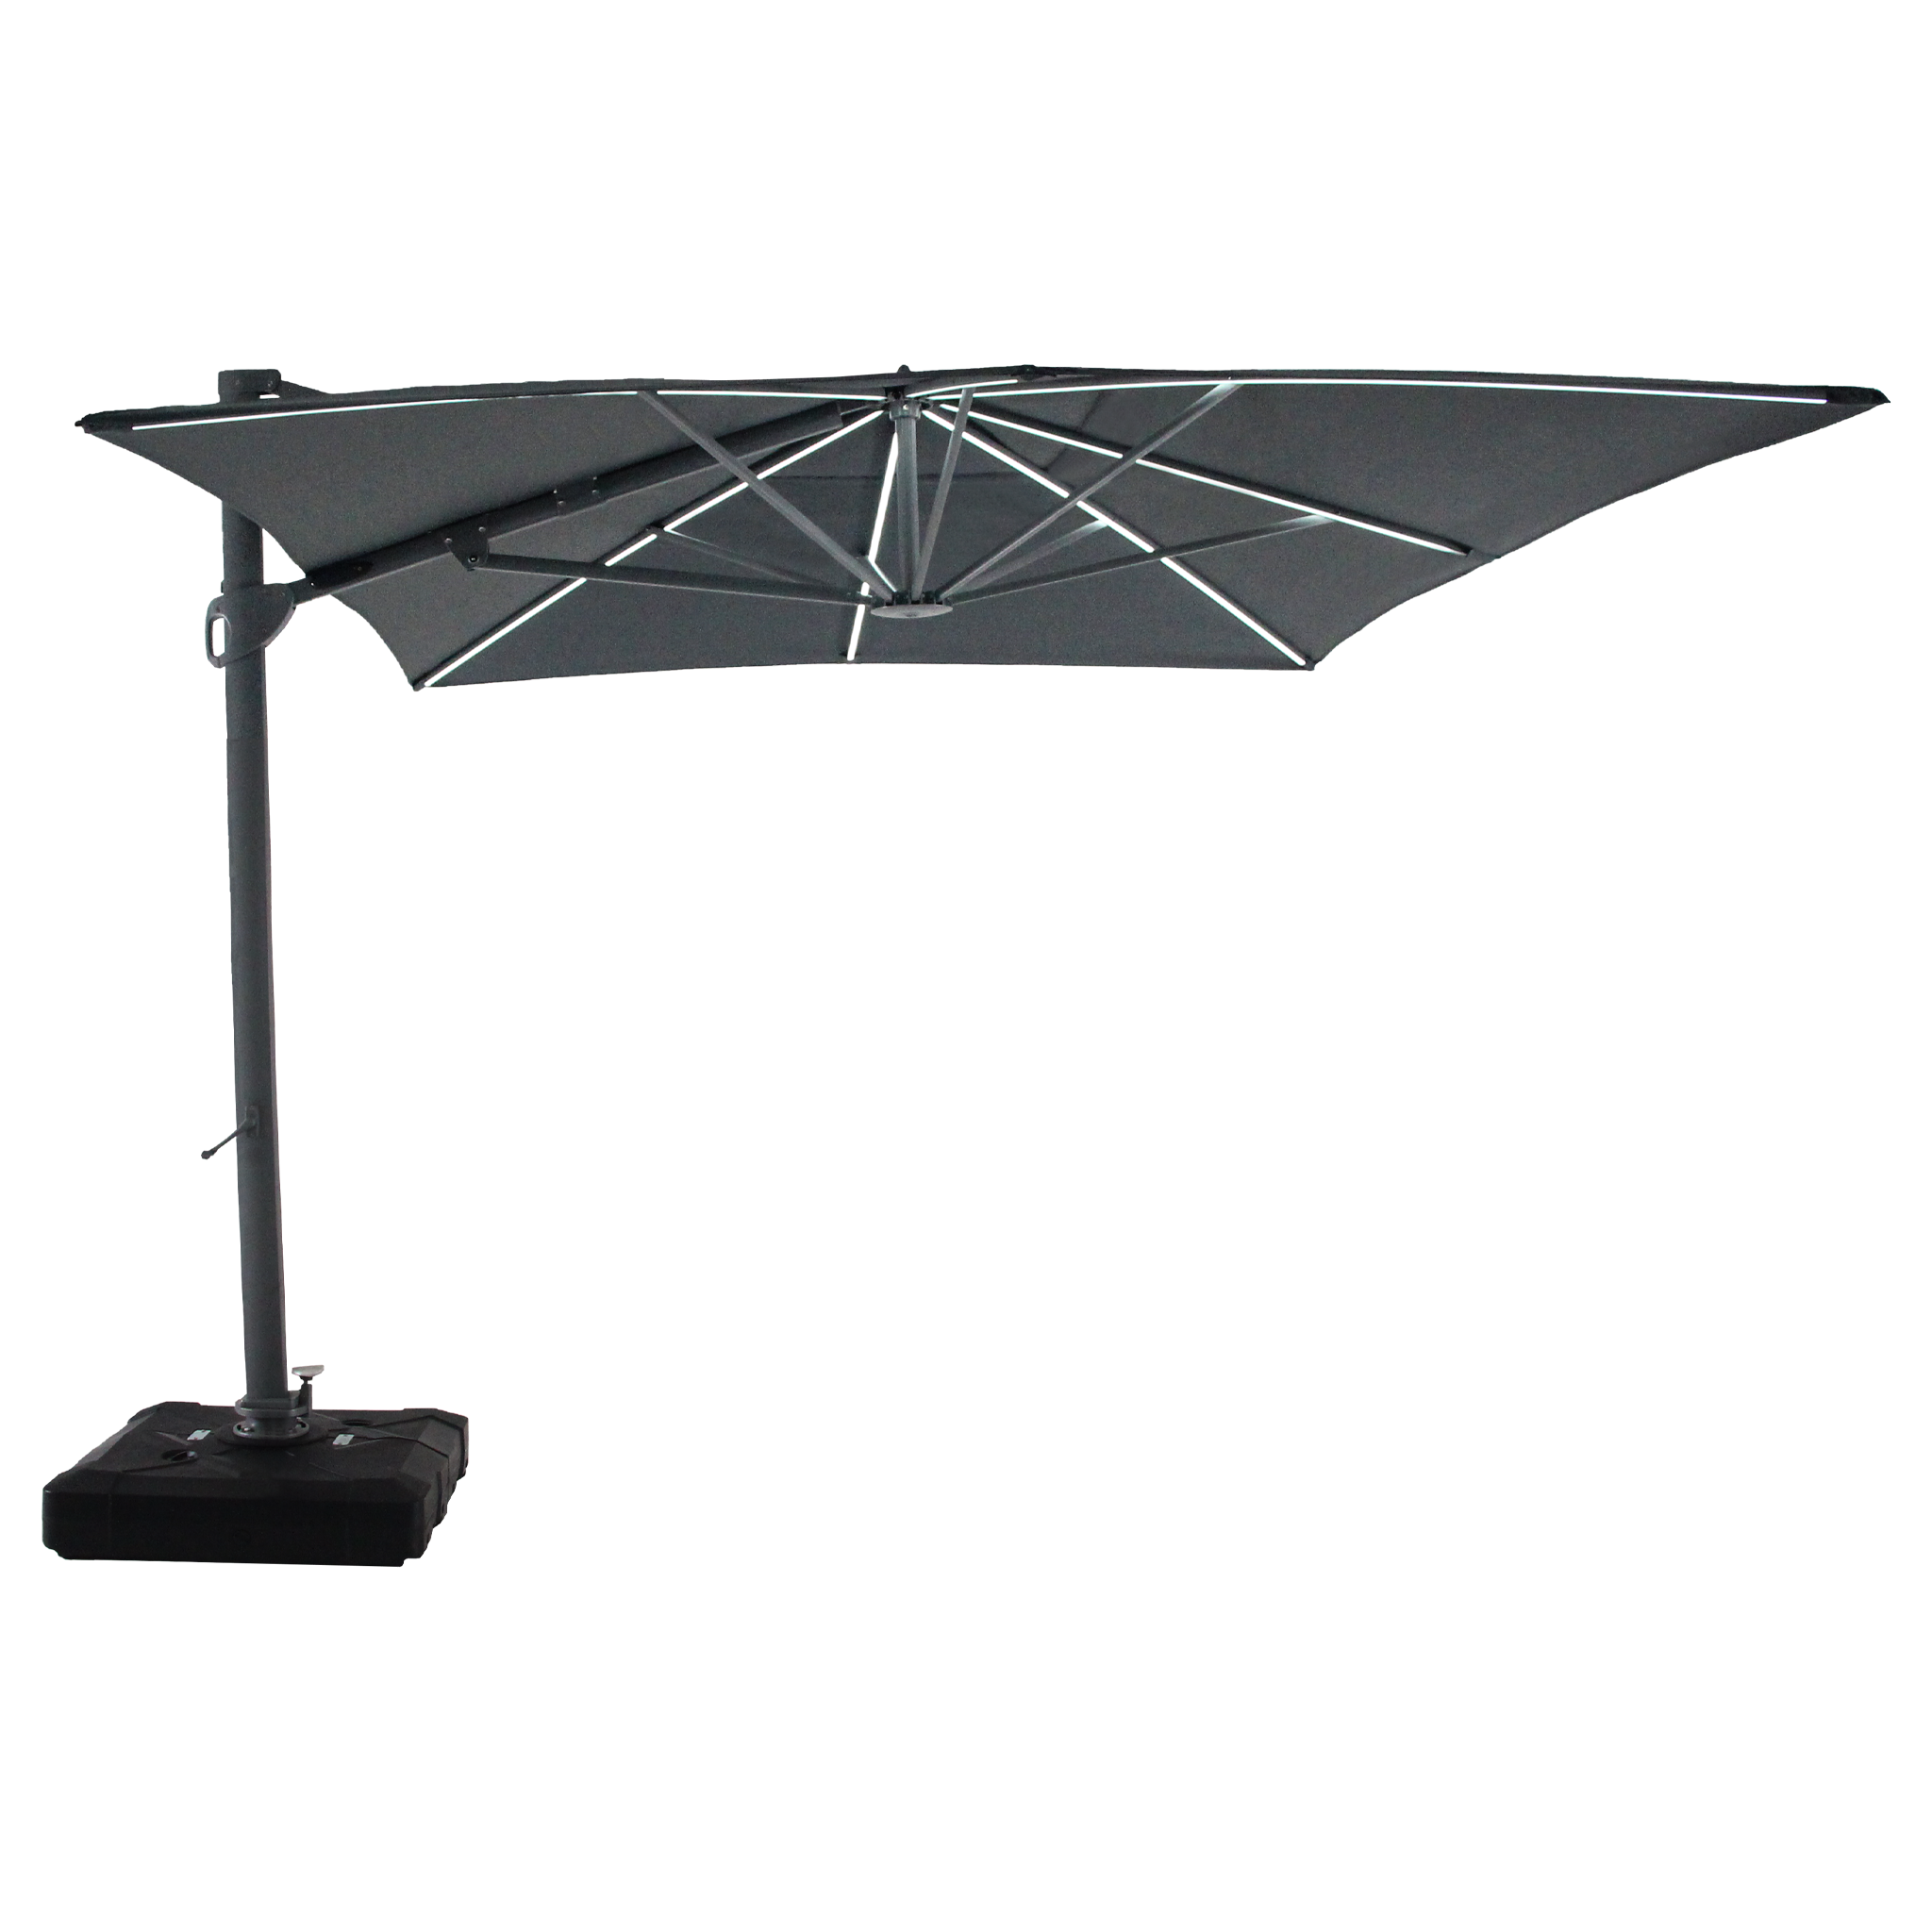 Pallas 4m x 3m Rectangular Cantilever Parasol with LED Lighting in Charcoal